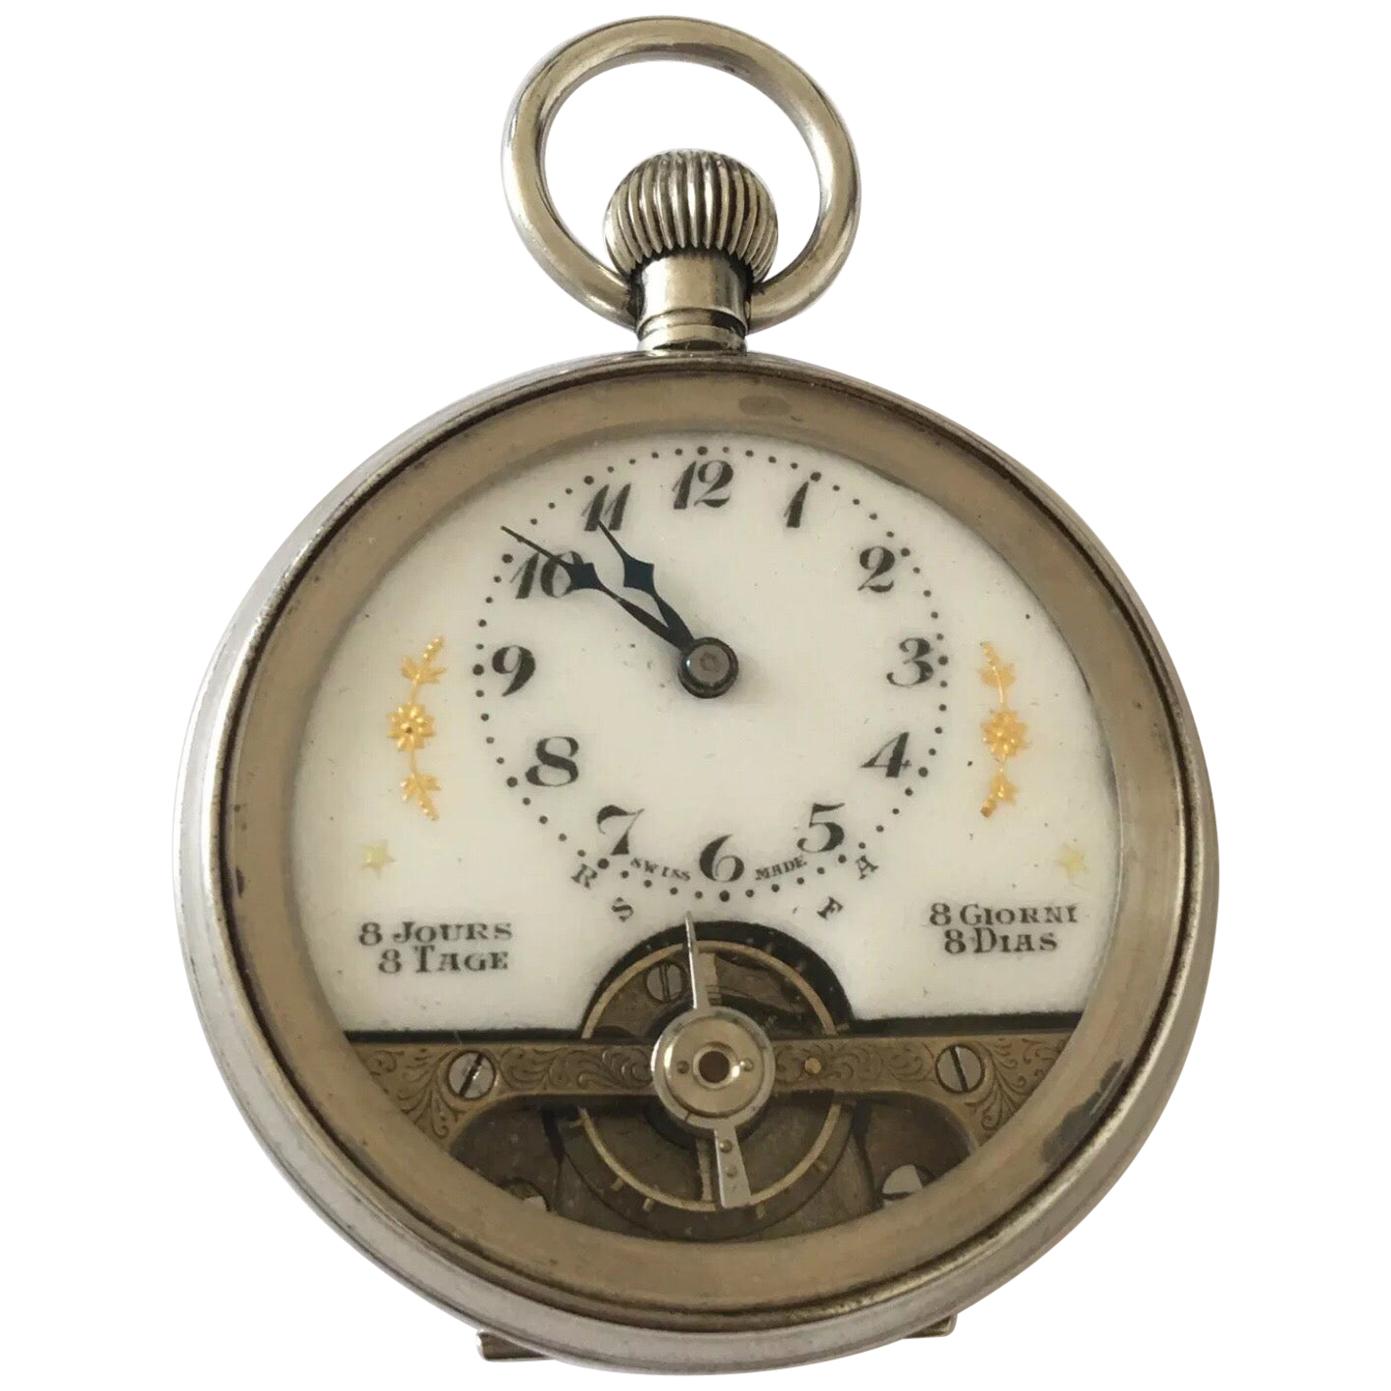 Hebdomas VINTAGE UNSIGNED HEBDOMAS POCKET WATCH 8 DAY EXPOSED BALANCE KEEPING TIME 